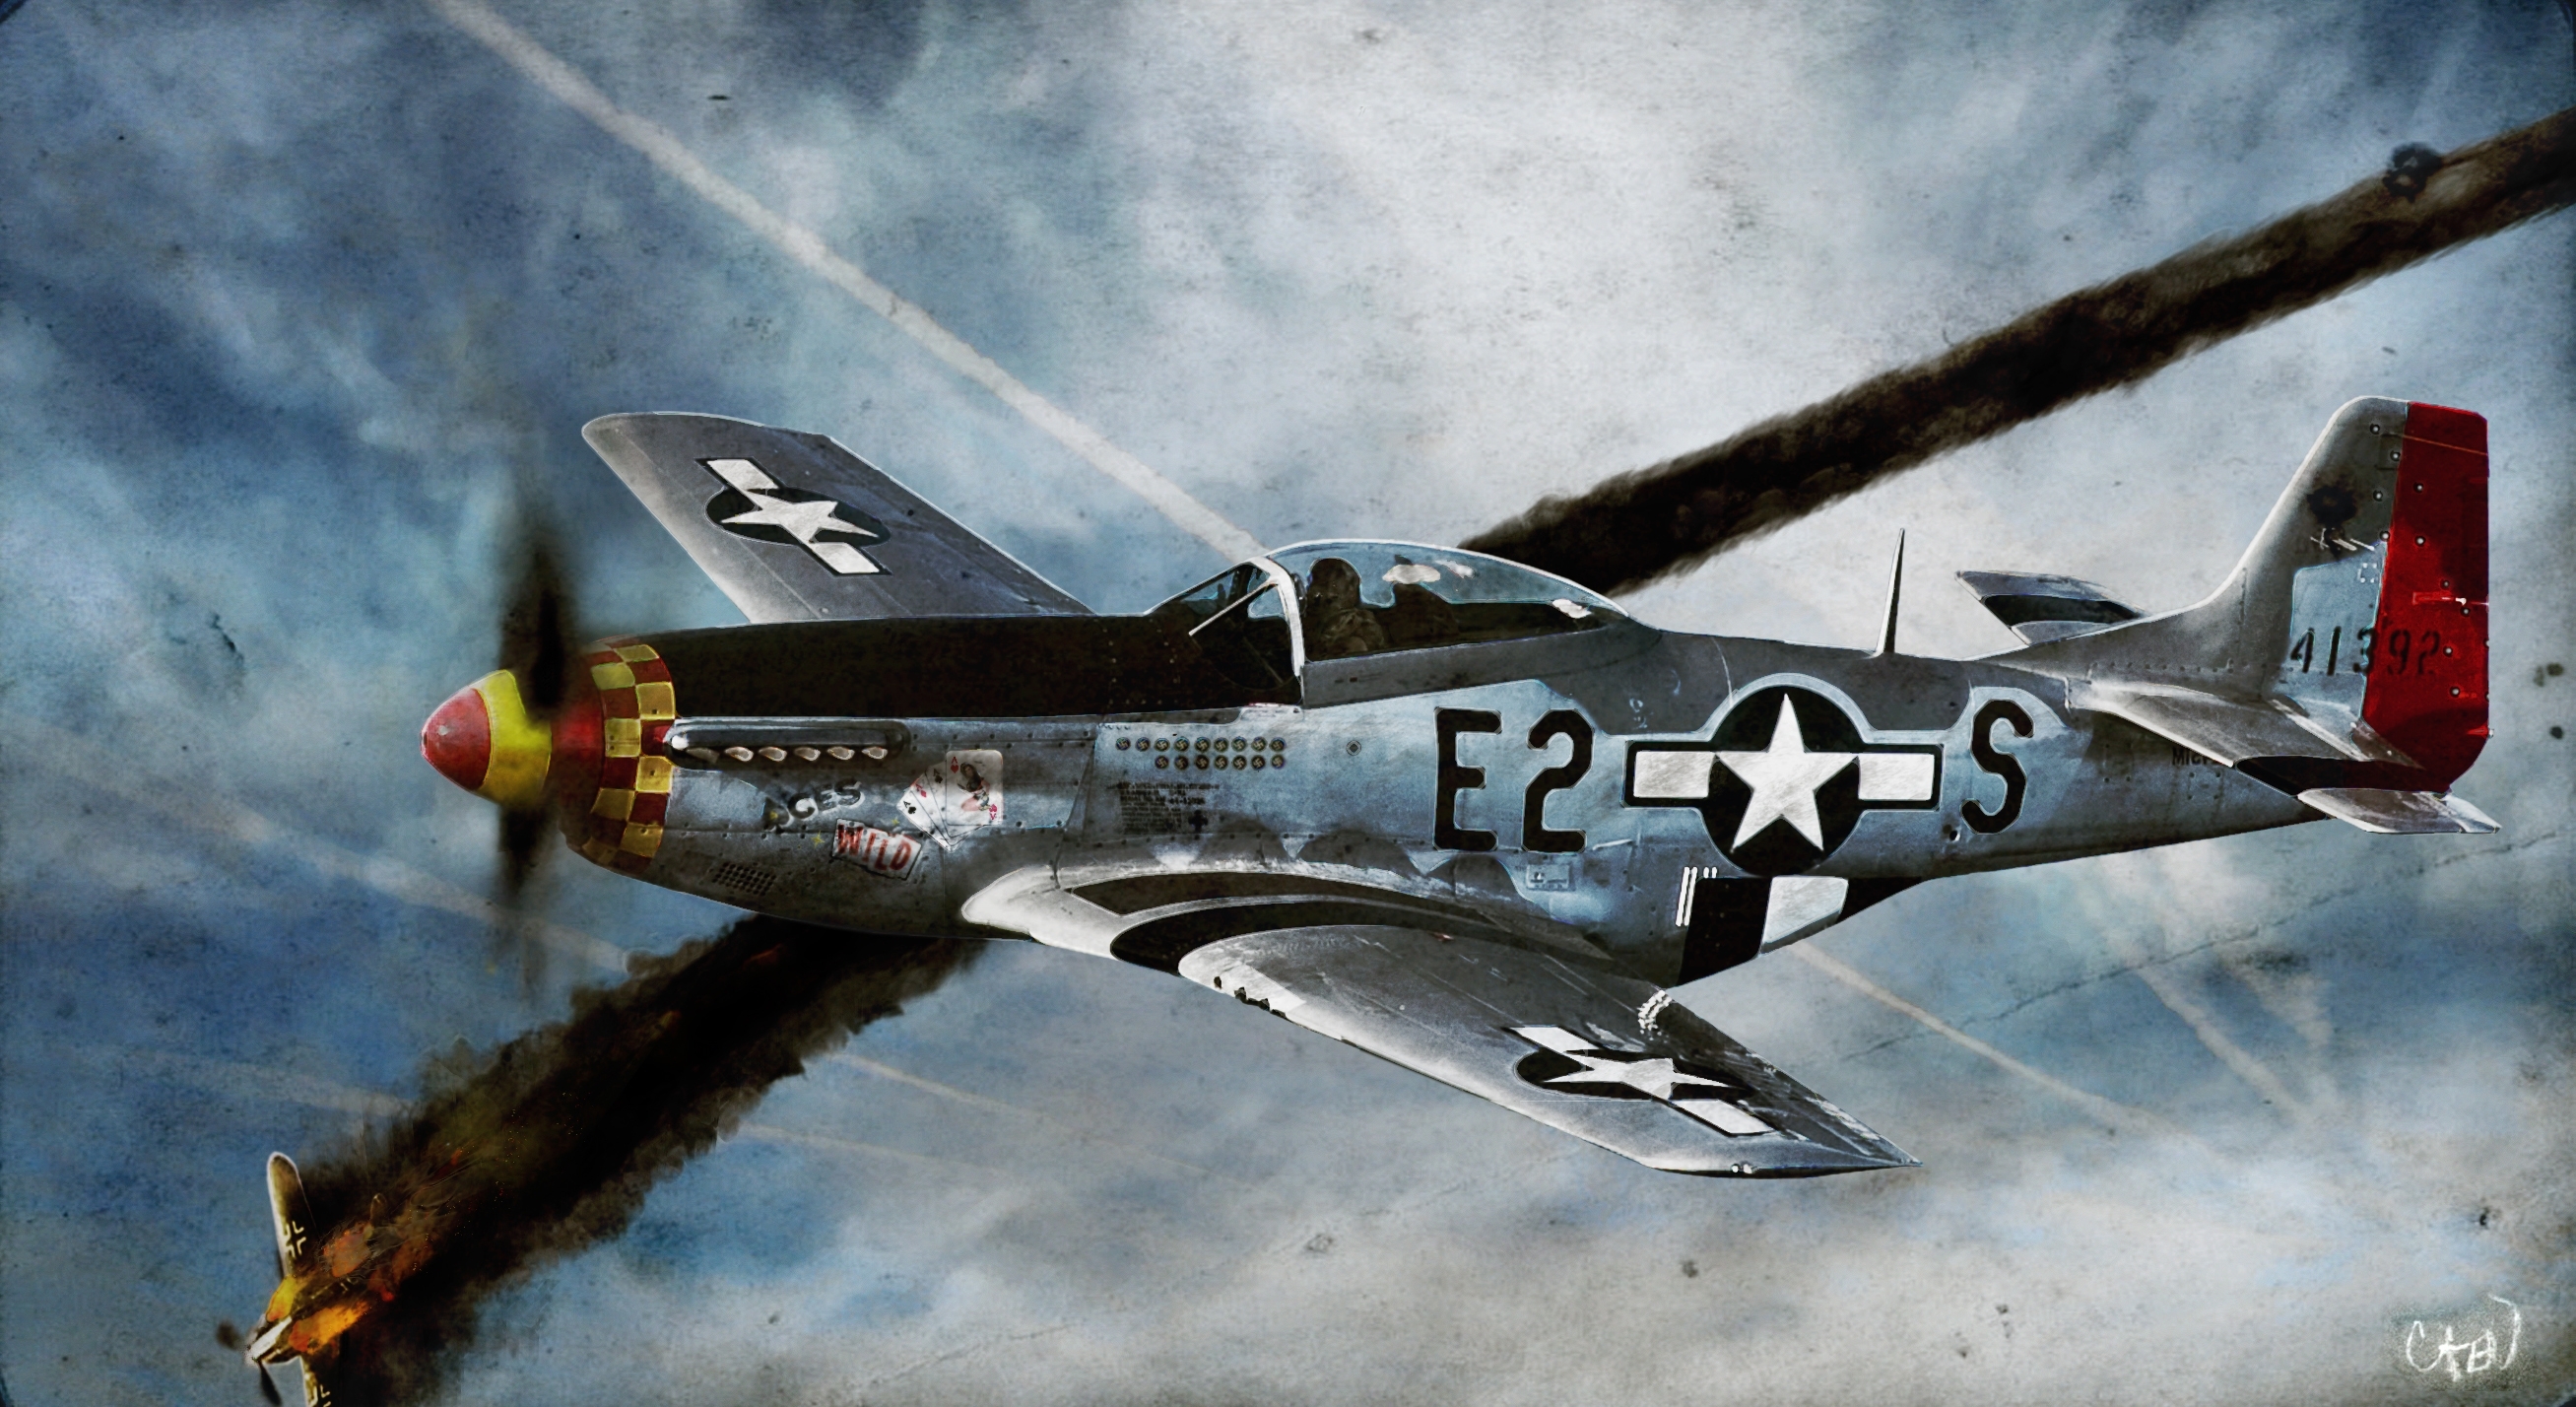 10 New P 51 Mustang Background FULL HD 1920×1080 For PC Desktop